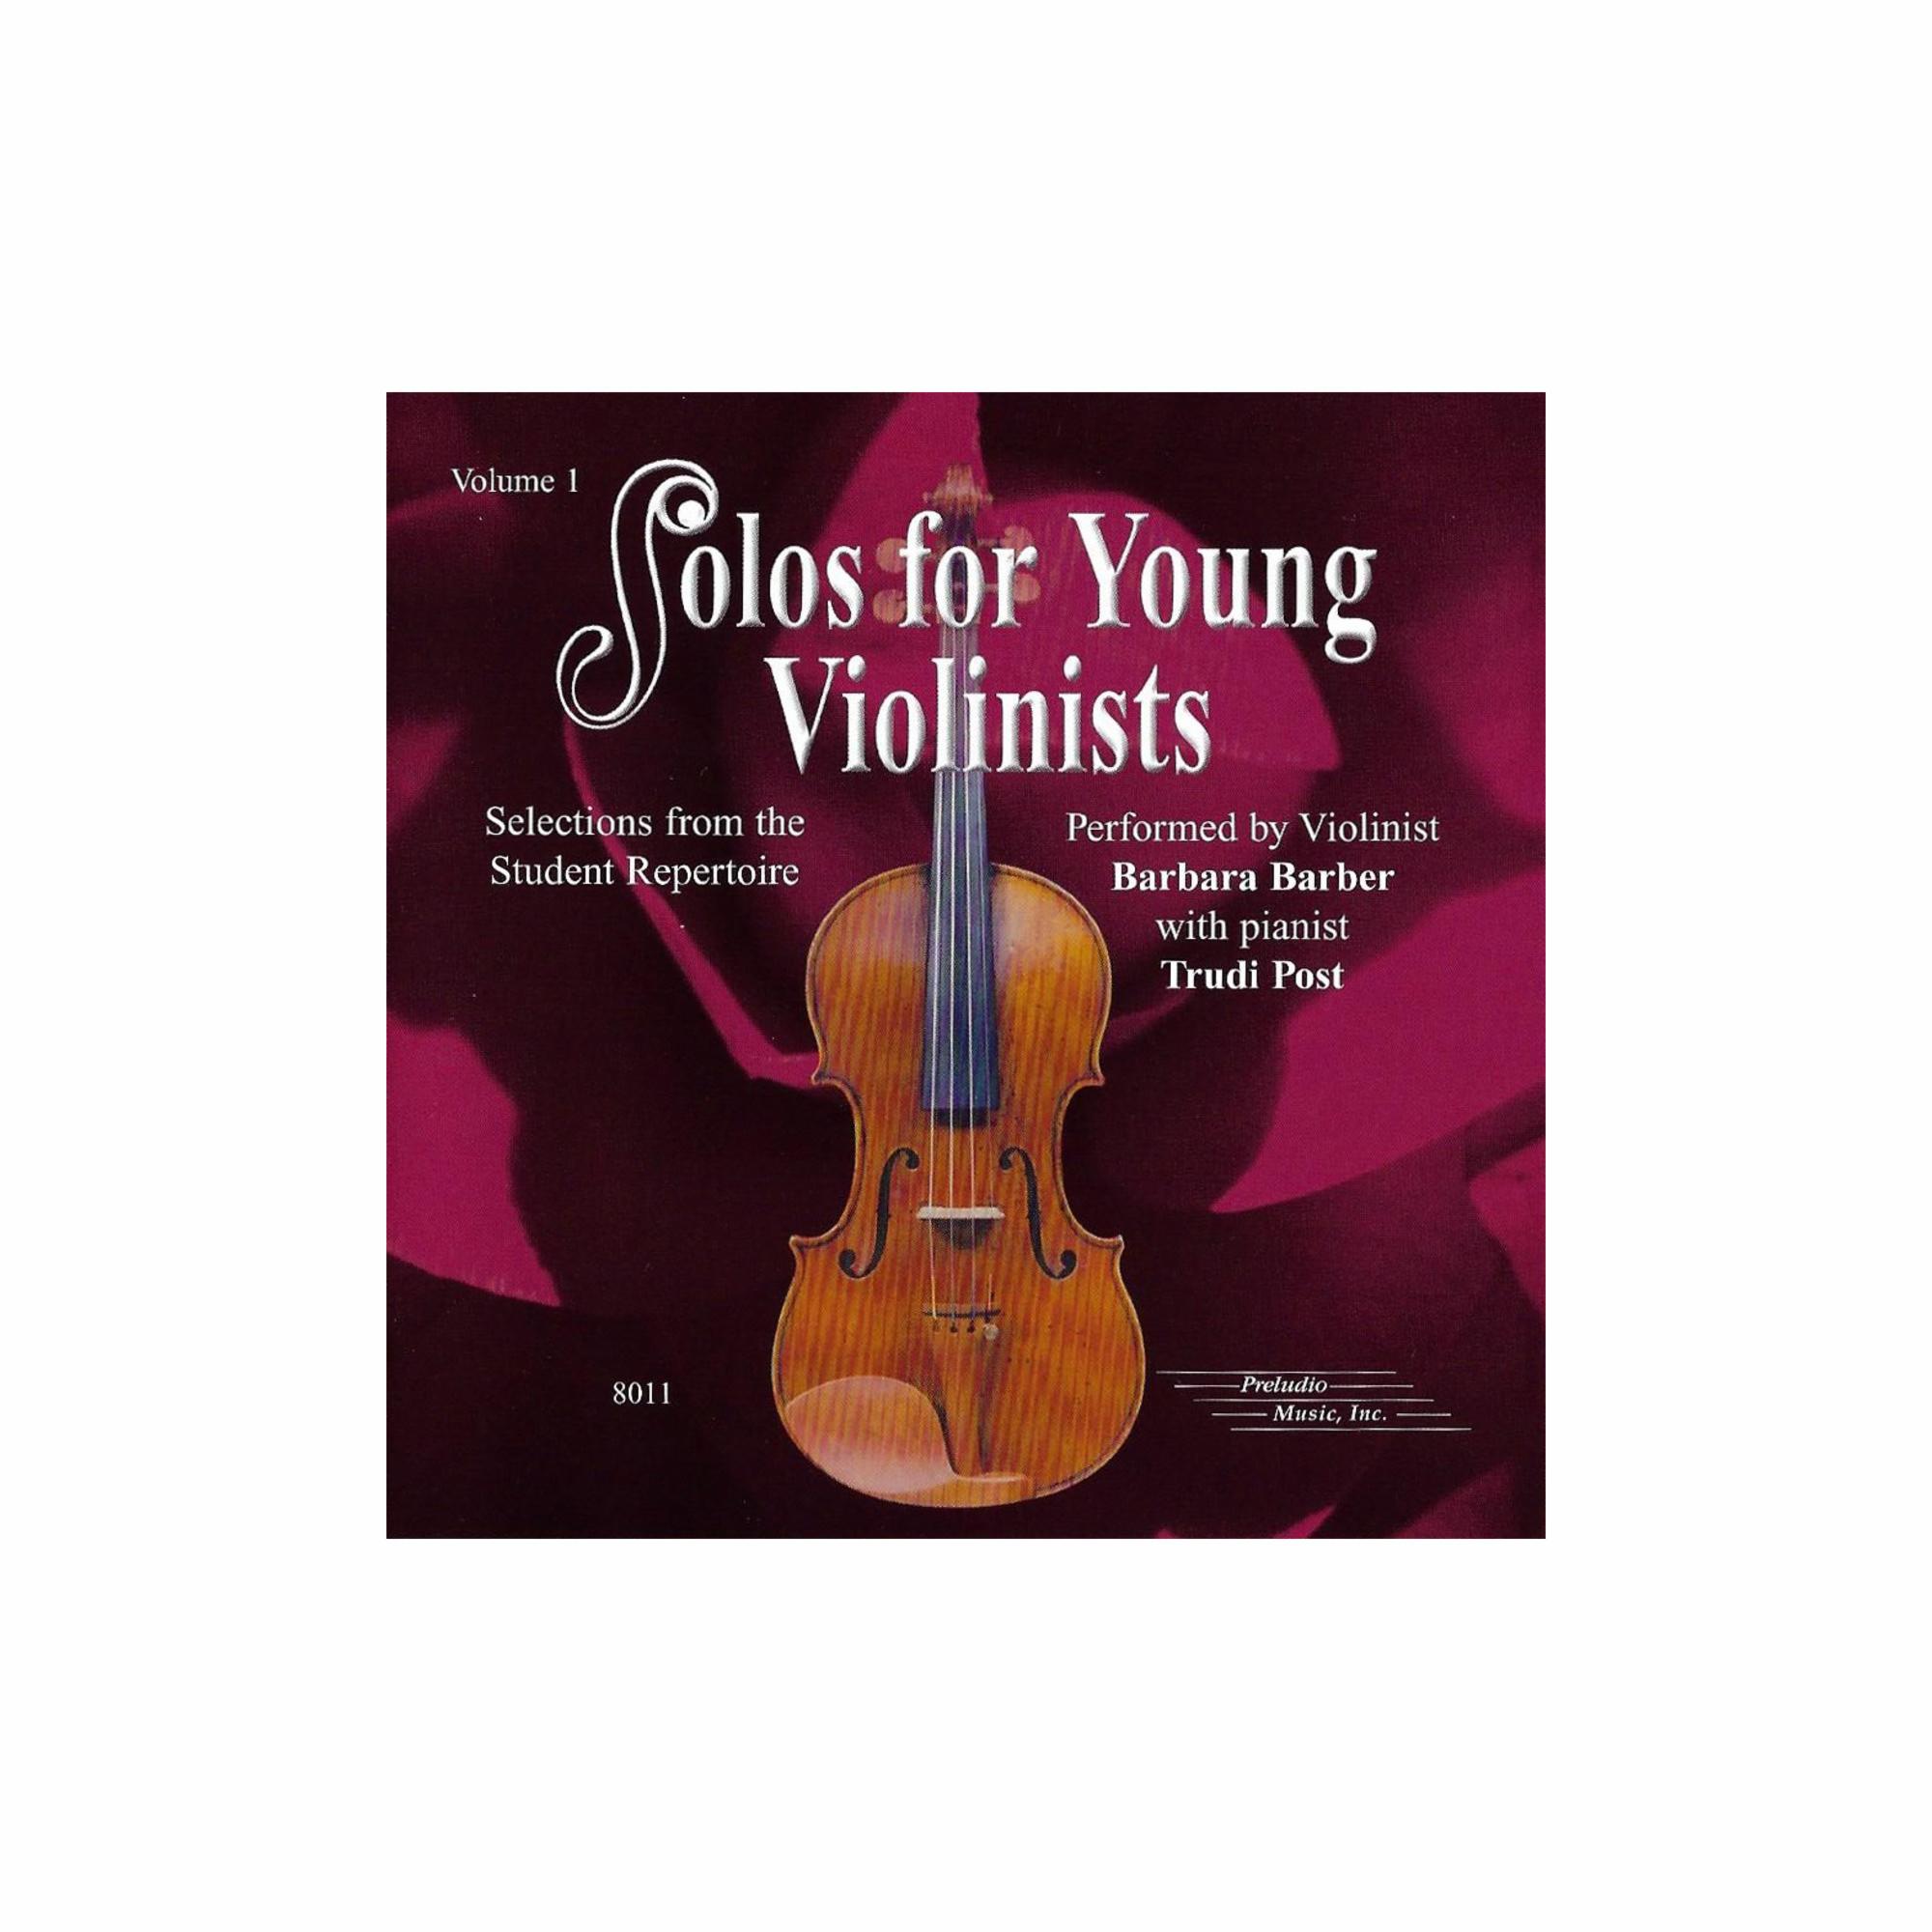 Solos for Young Violinists: CD's